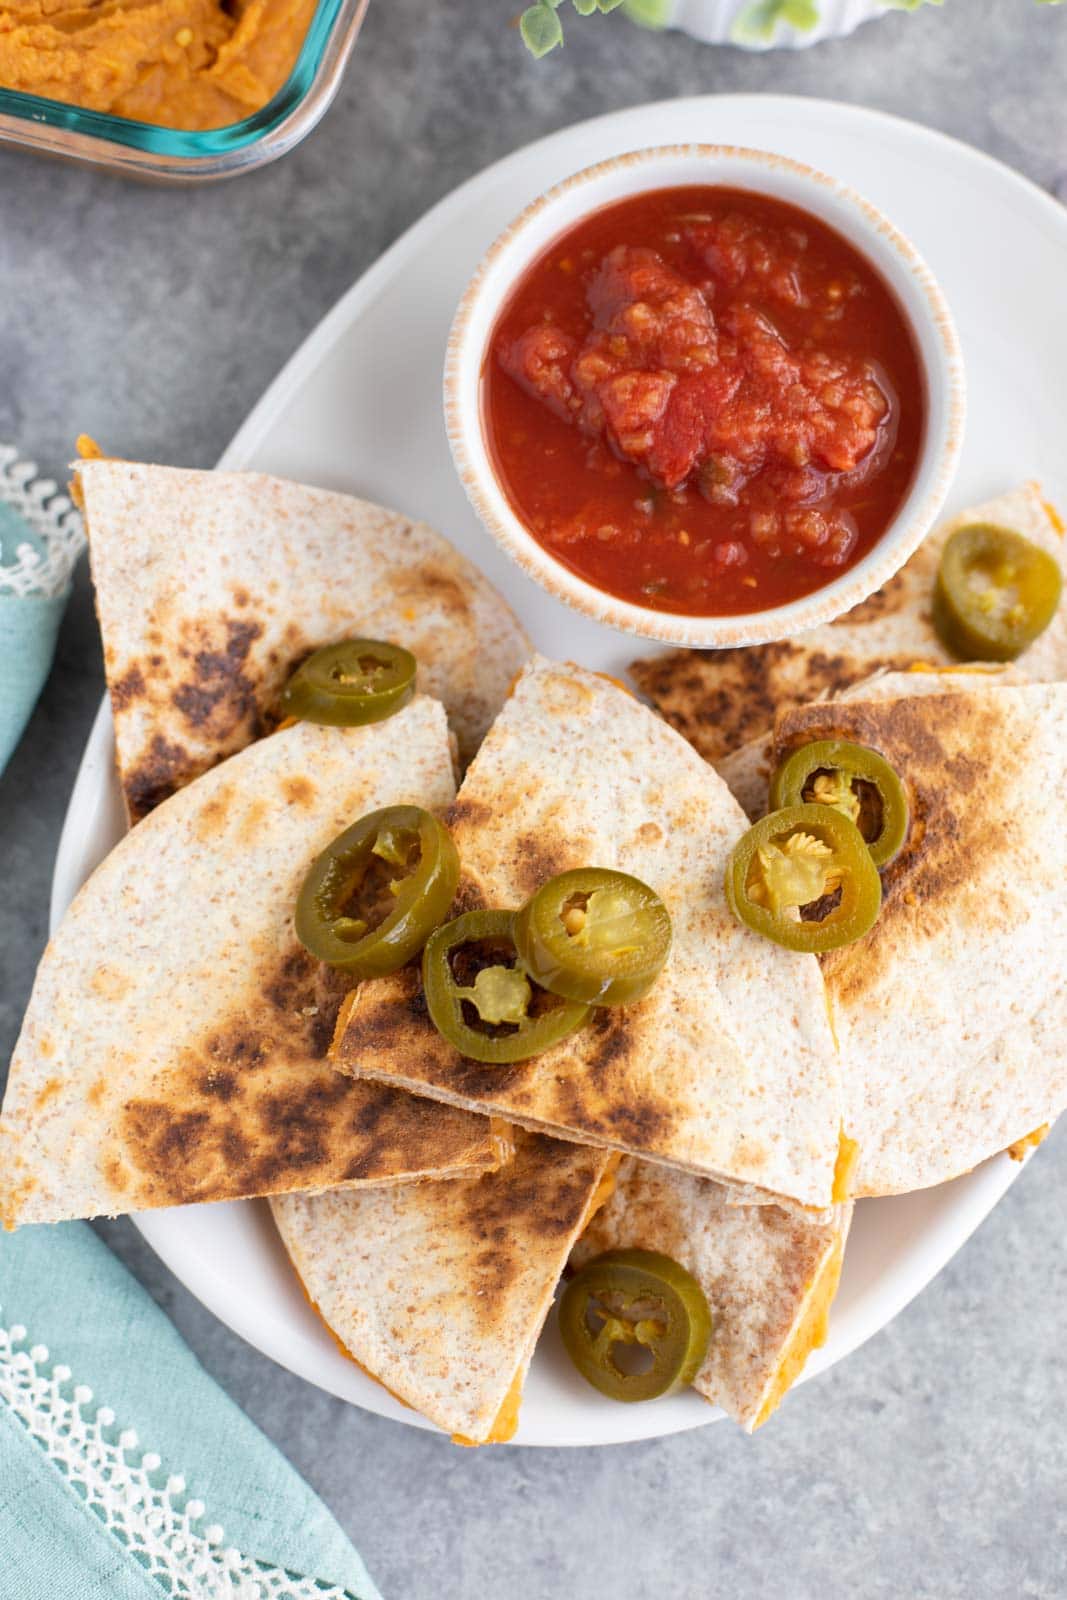 Multiple quesadilla slices topped with jalapeños on a white plate with a bowl of salsa.